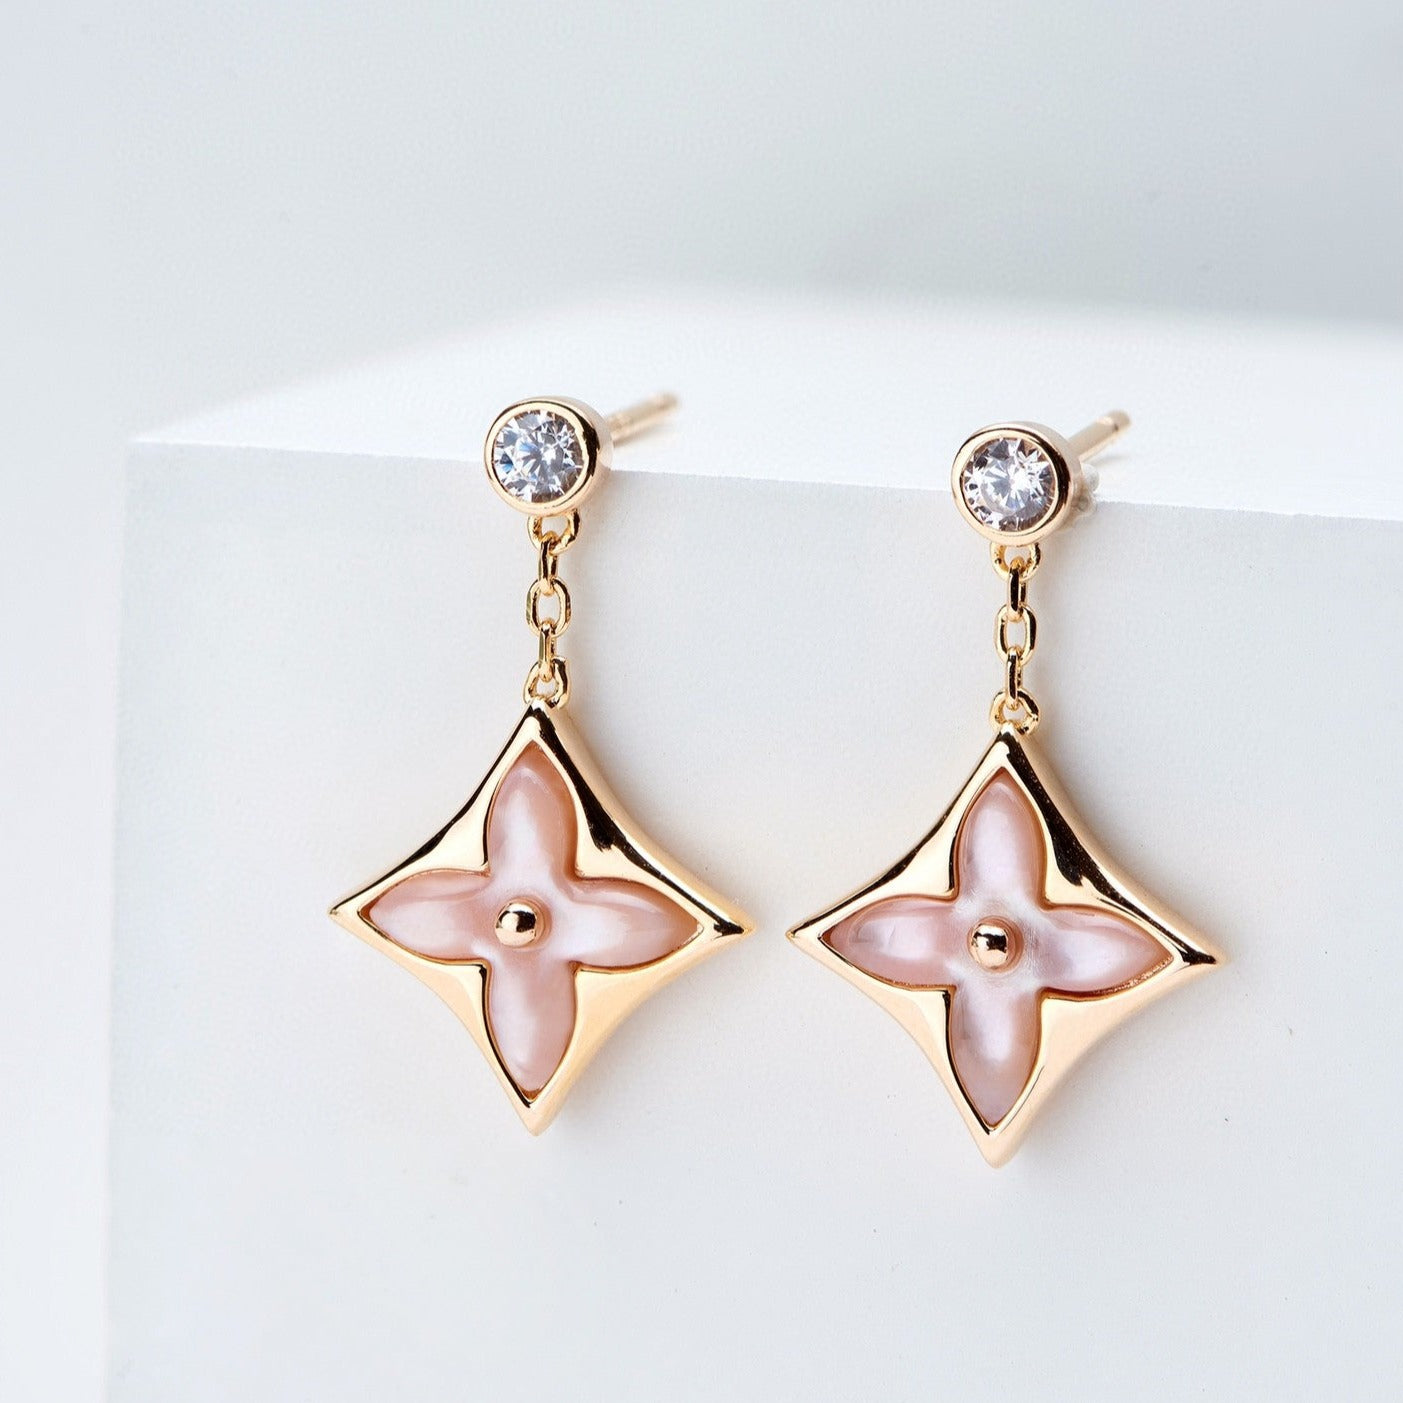 Color Blossom BB Star Ear Studs, Pink gold, pink Mother of pearl